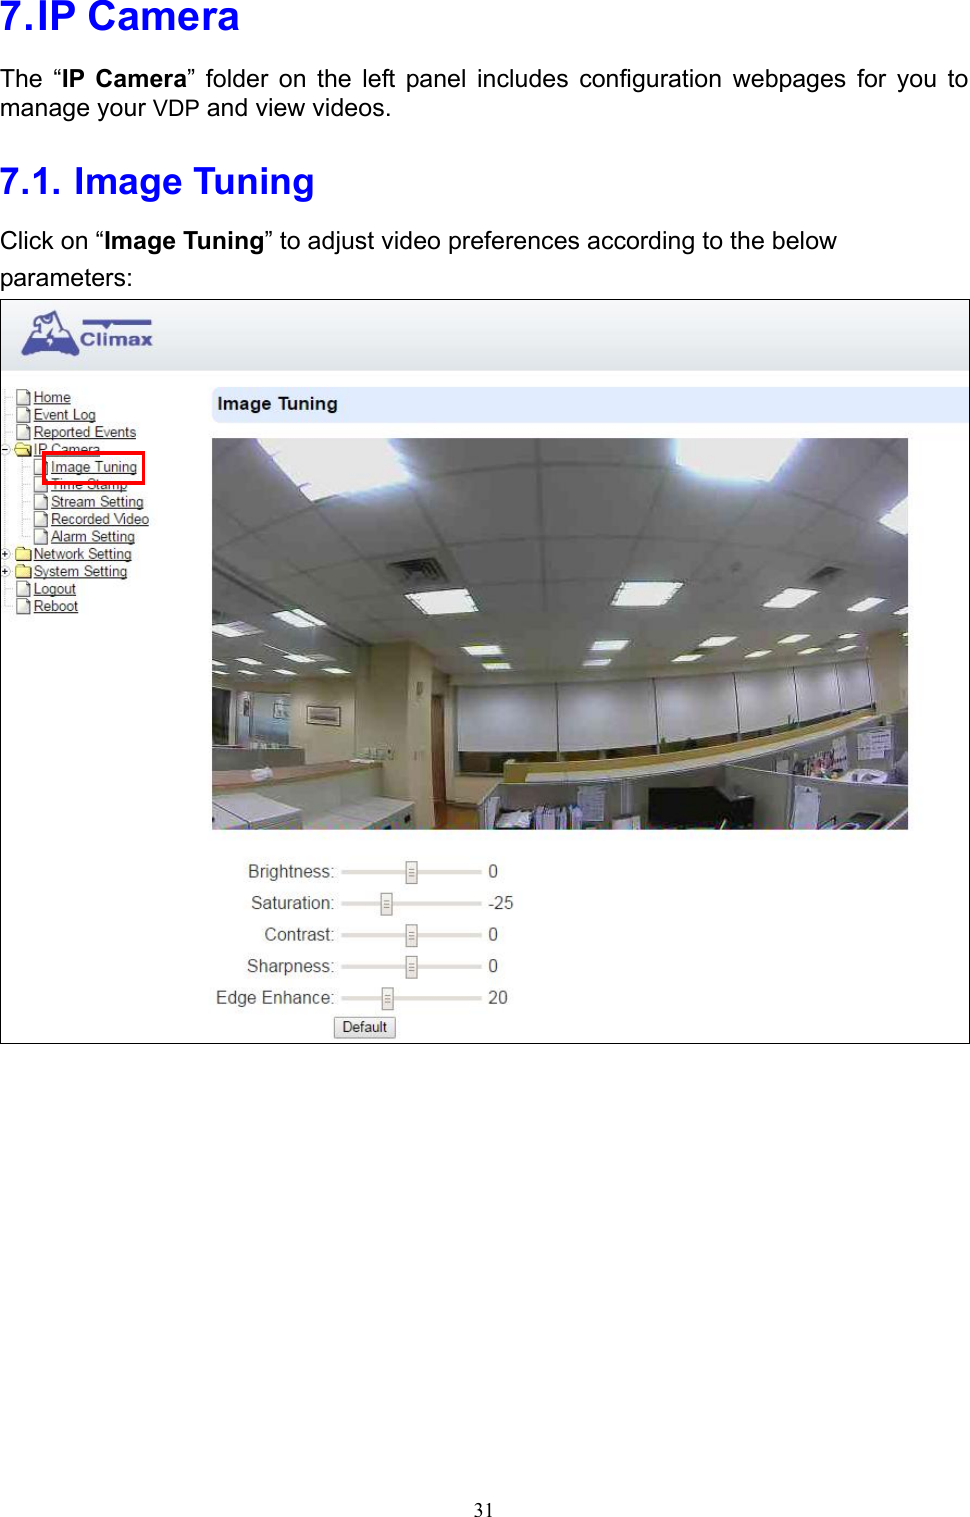 31  7. IP Camera The  “IP  Camera”  folder  on  the  left  panel  includes  configuration  webpages  for  you  to manage your VDP and view videos. 7.1. Image Tuning Click on “Image Tuning” to adjust video preferences according to the below parameters:              